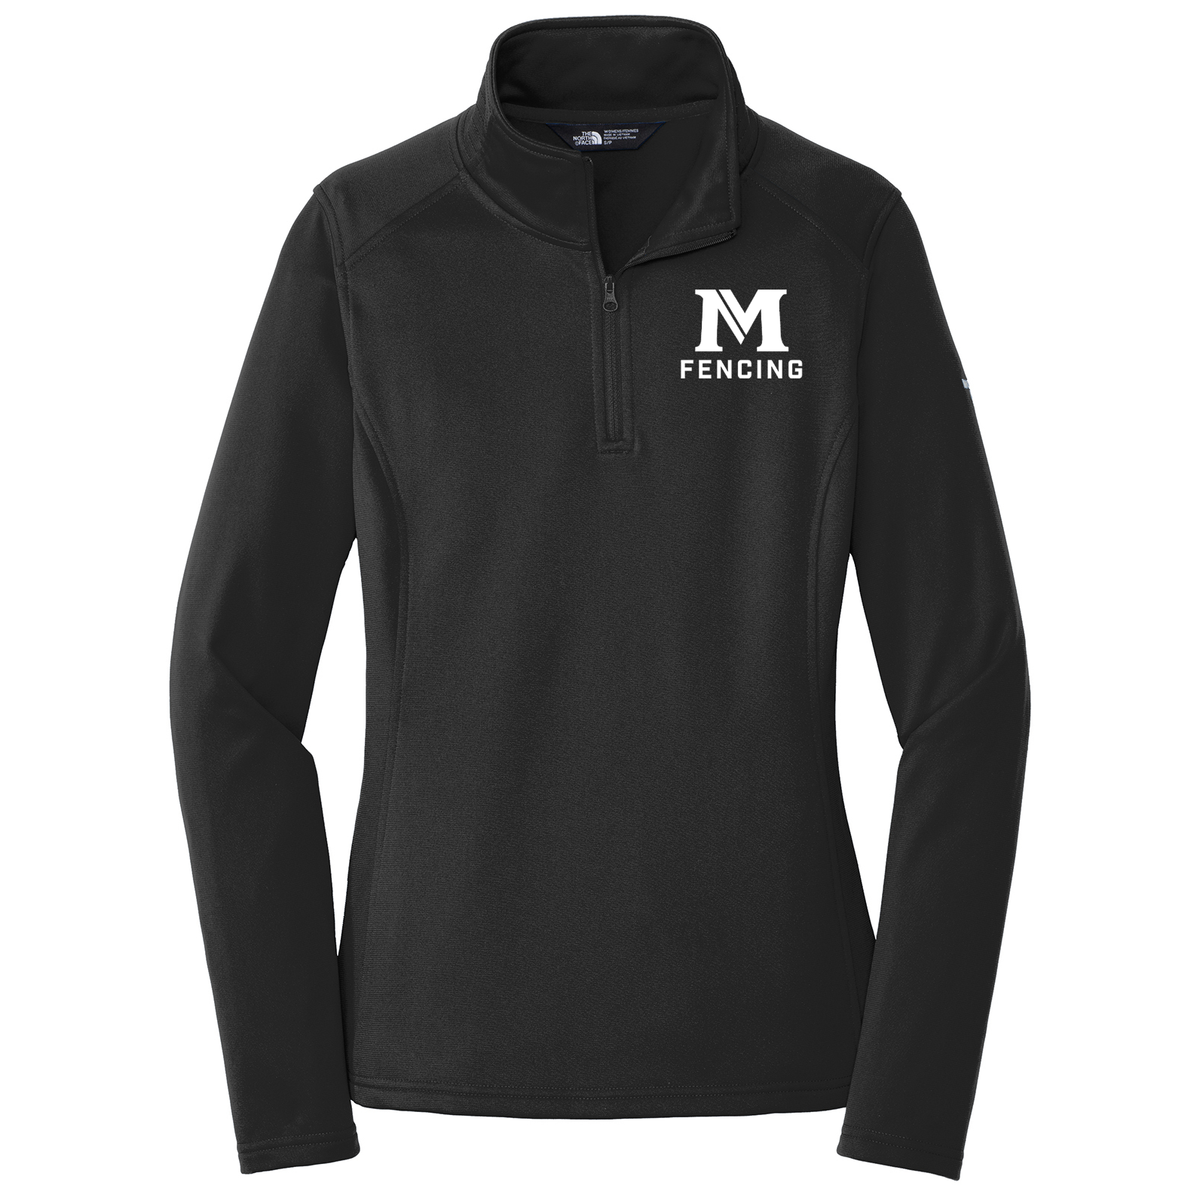 Masters School Winter Sports The North Face Ladies Tech 1/4 Zip